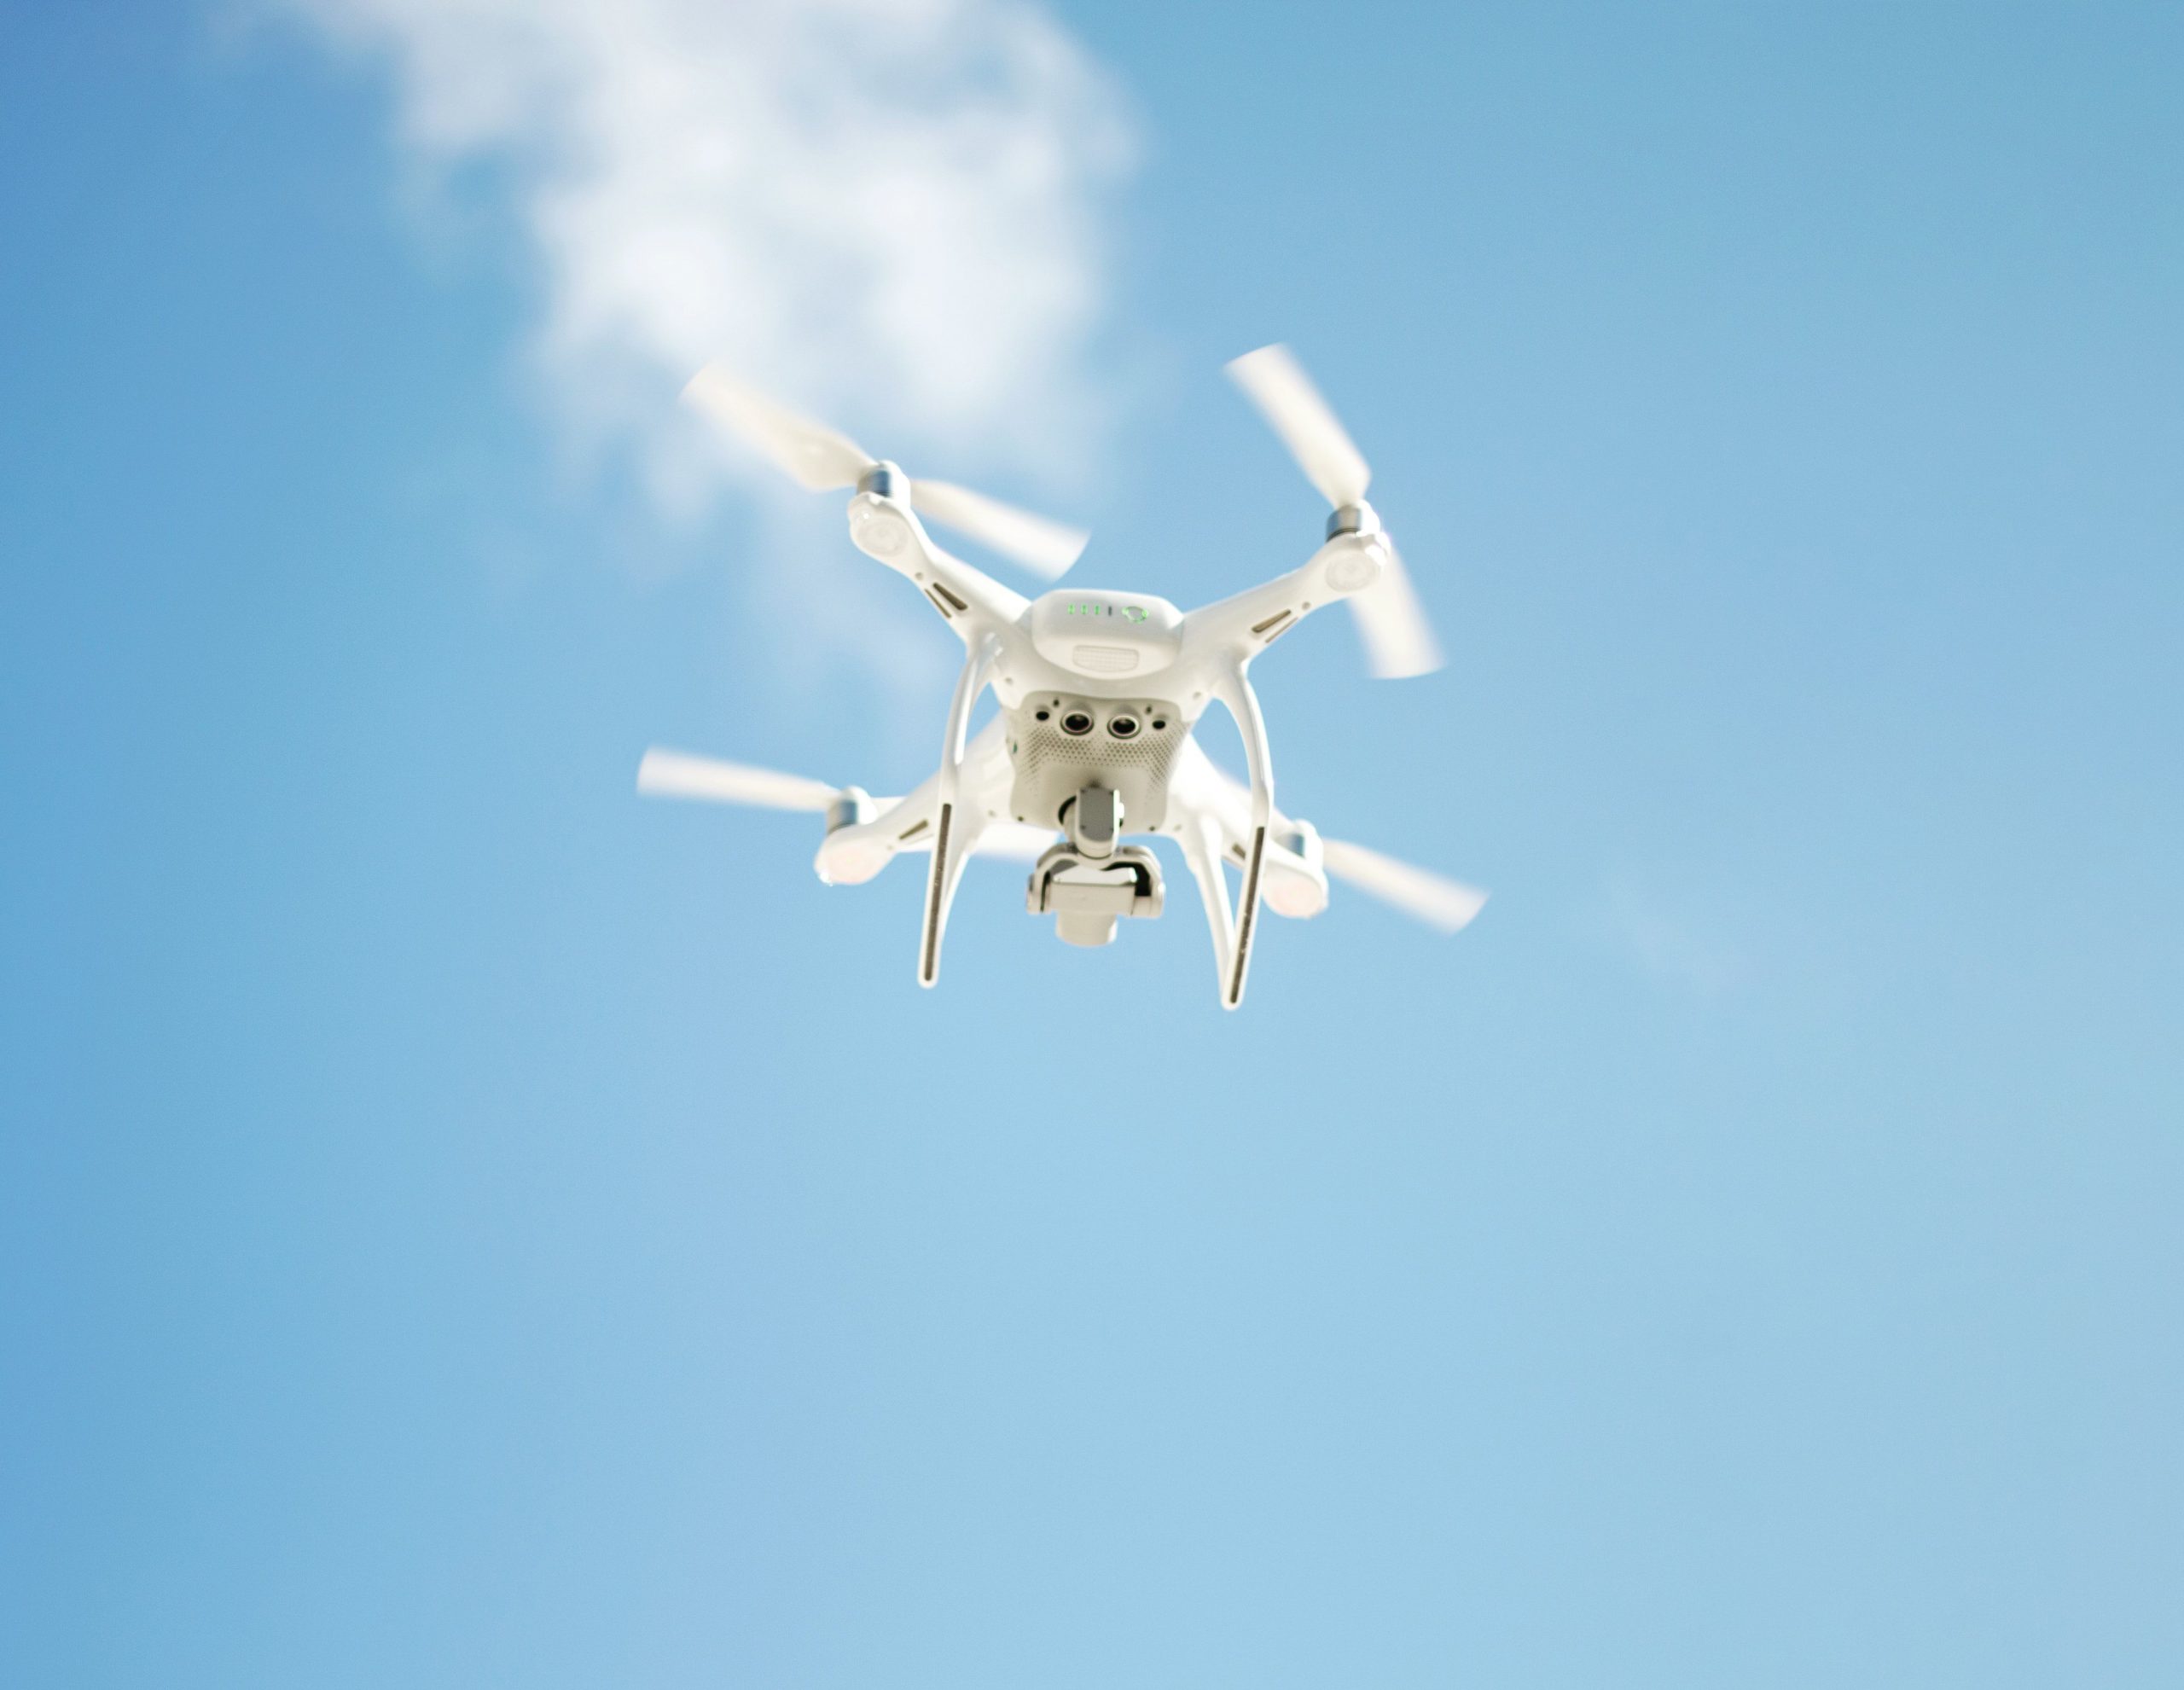 National Health Service to use drones to deliver COVID-19 samples between UK hospitals